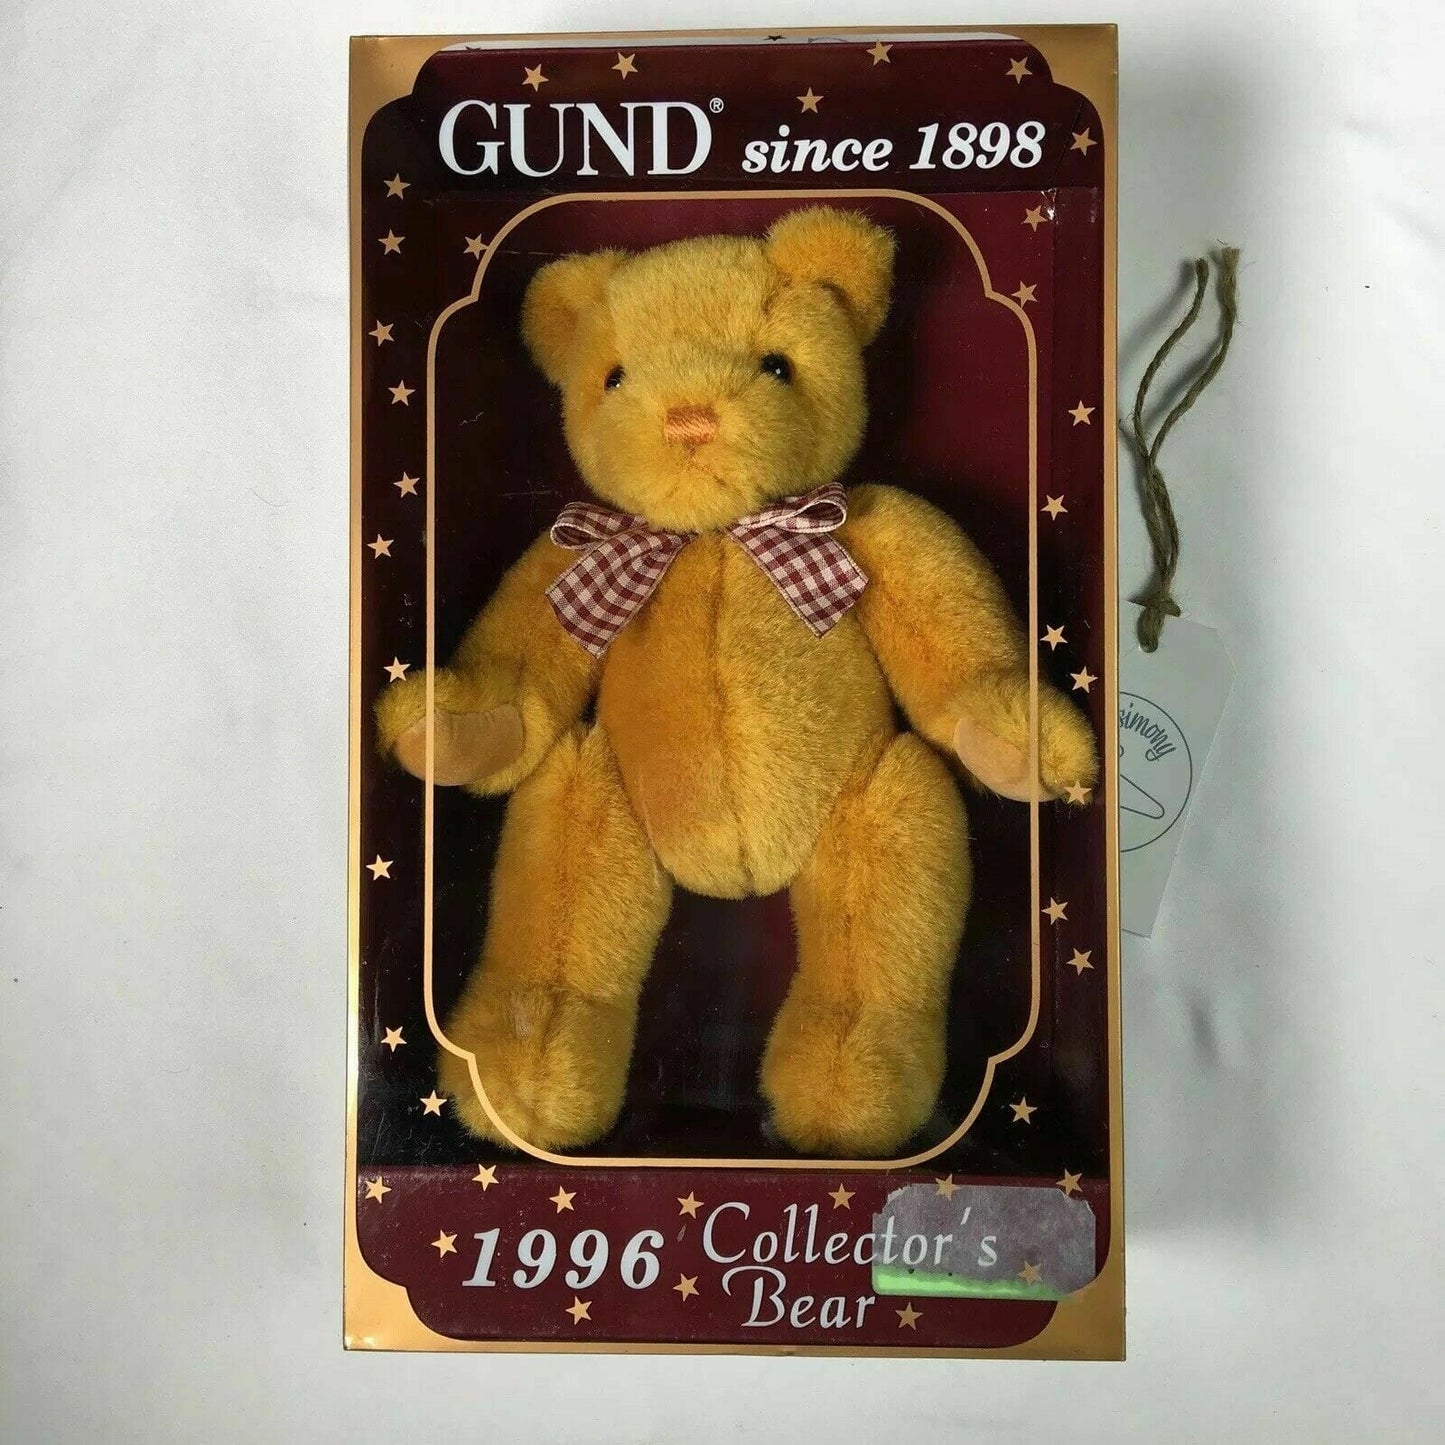 Gund Limited Edition Teddy Bear Jointed Collector’s Edition 1996 Yellow In Box